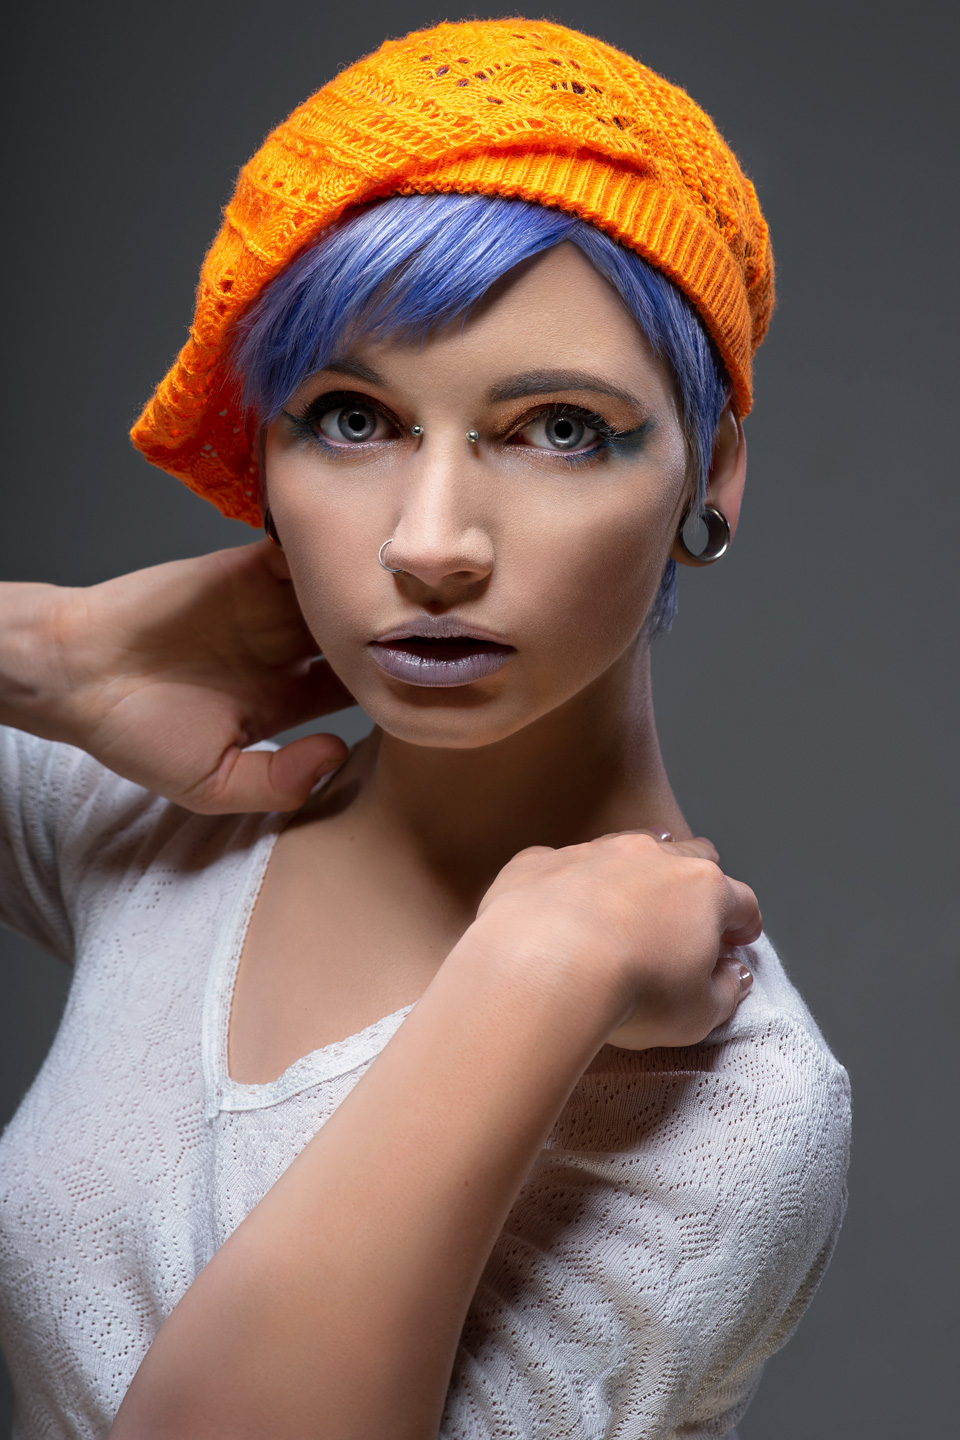 Blue Haired Woman Orange Knitted Beret